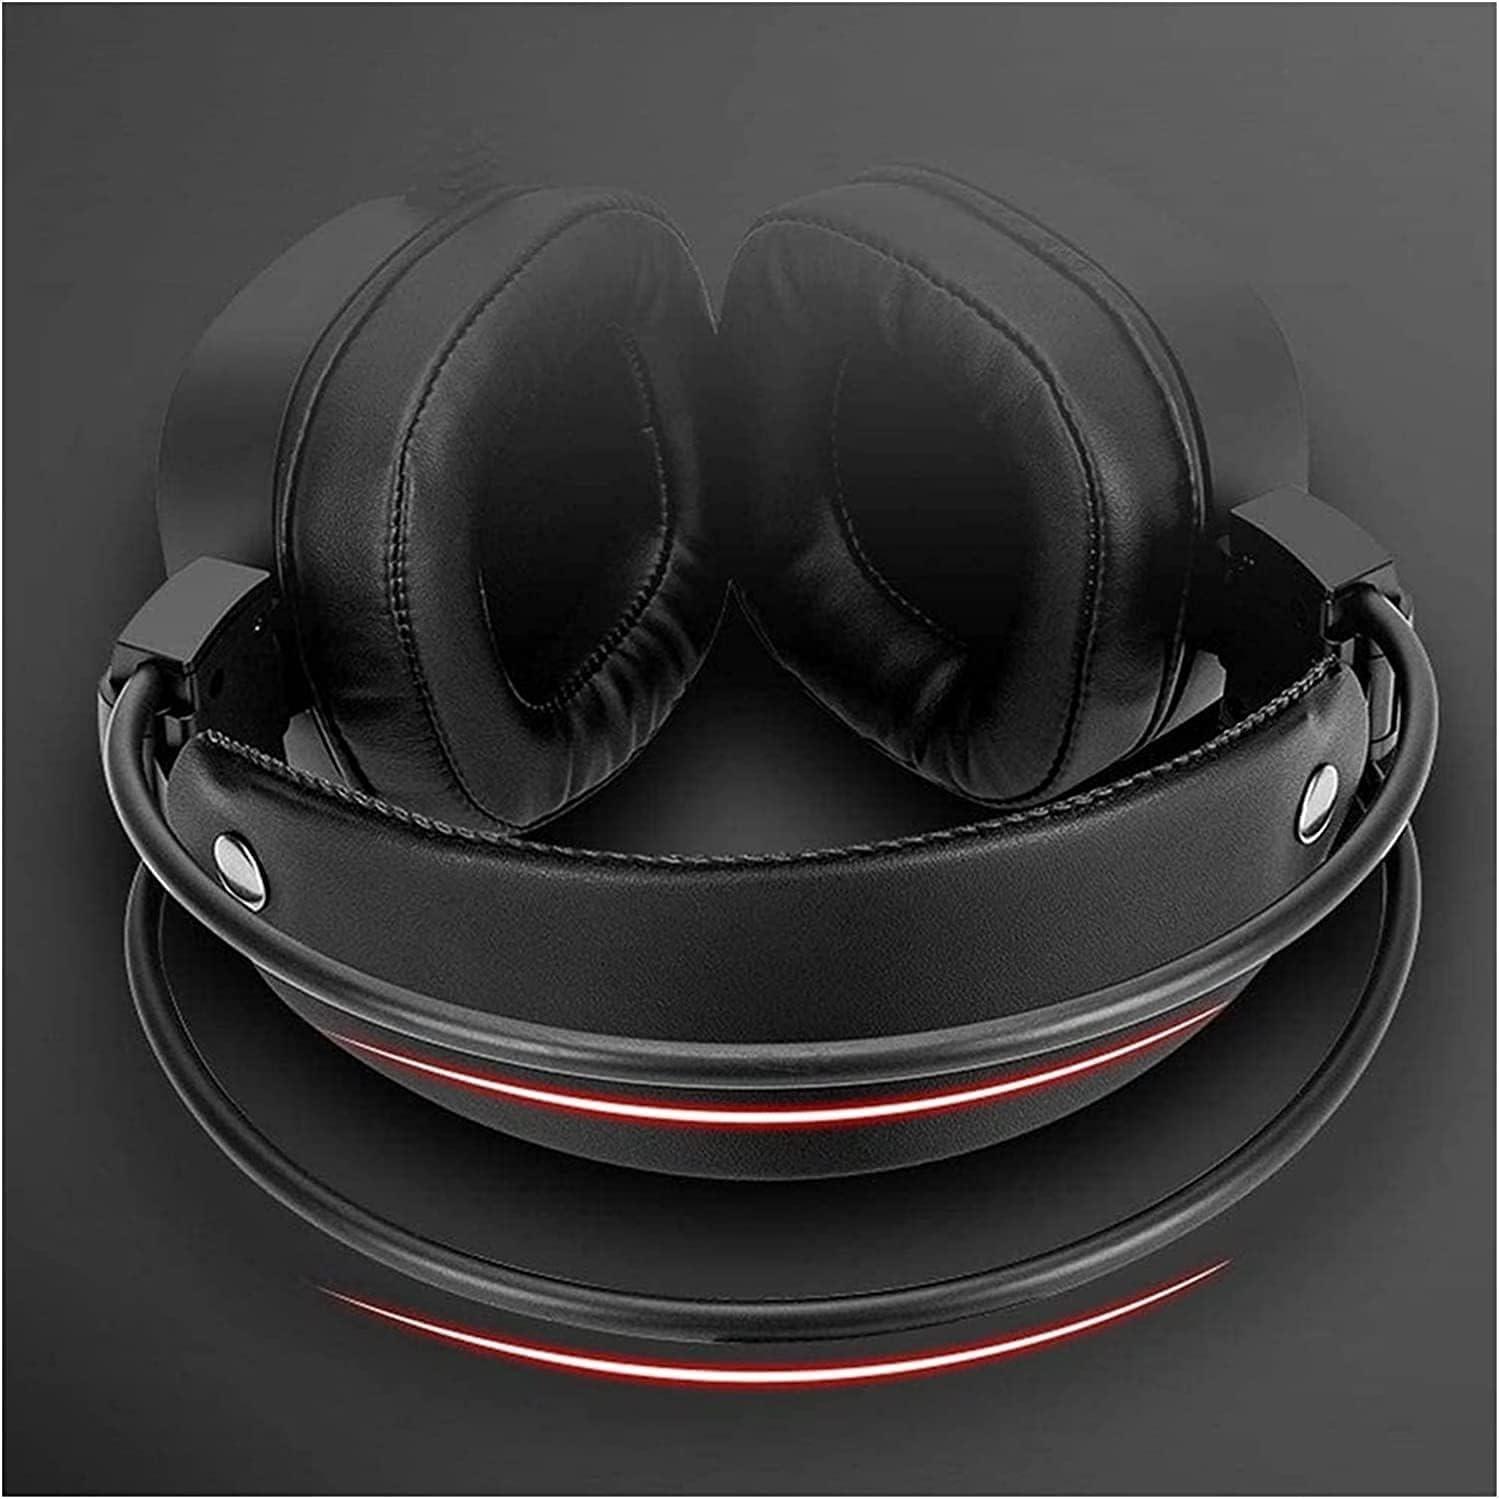 JYYBN Gaming Headset Sound Adjustable Bass Breathable Leatherette